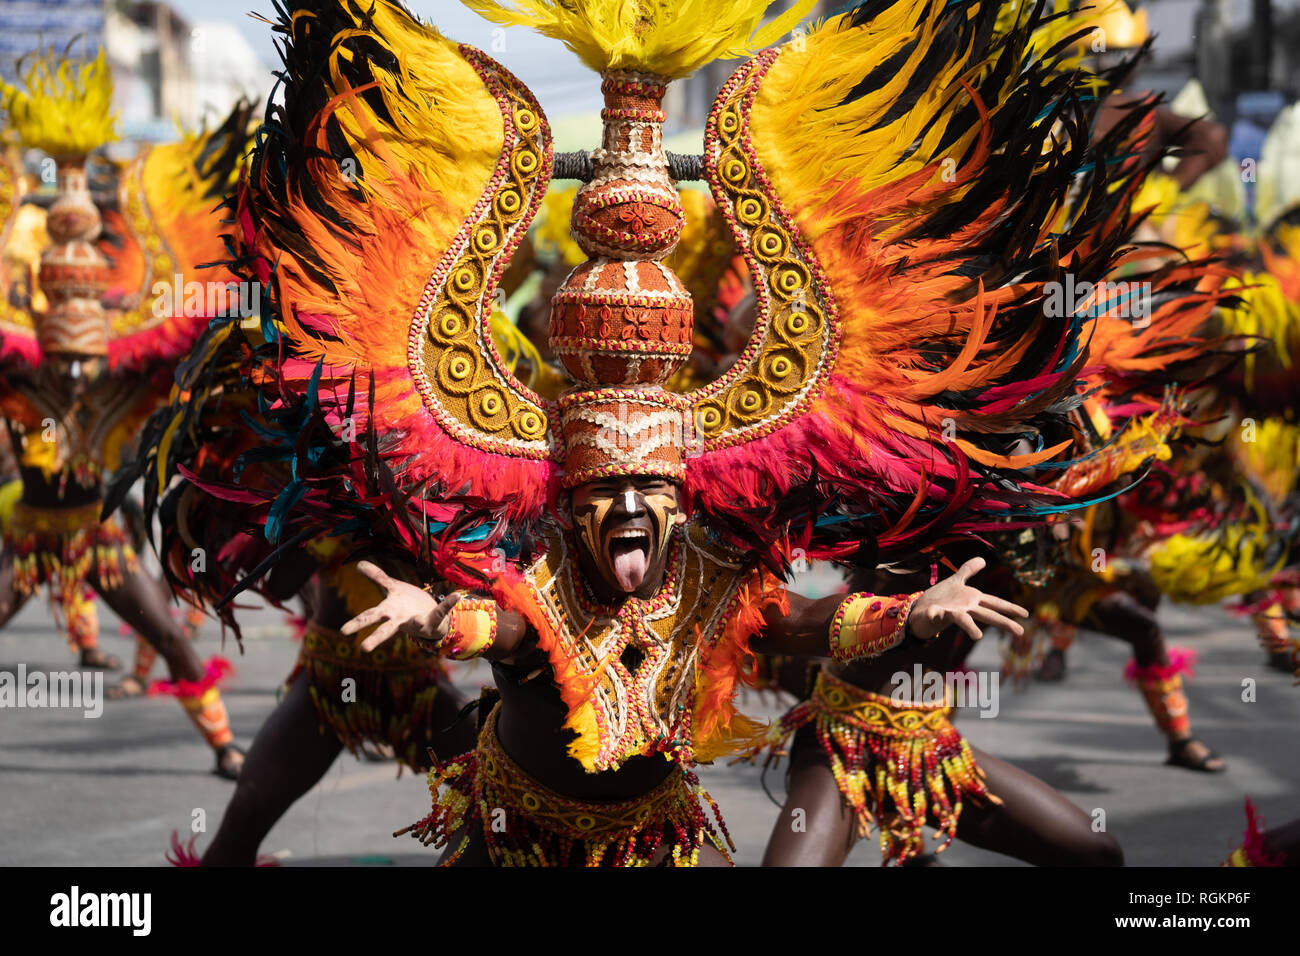 27/01/2019 Iloilo City,Philippines.The culmination of Dinagyang,one of the most vibrant annual street dancing festivals in the Philippines took place  Stock Photo